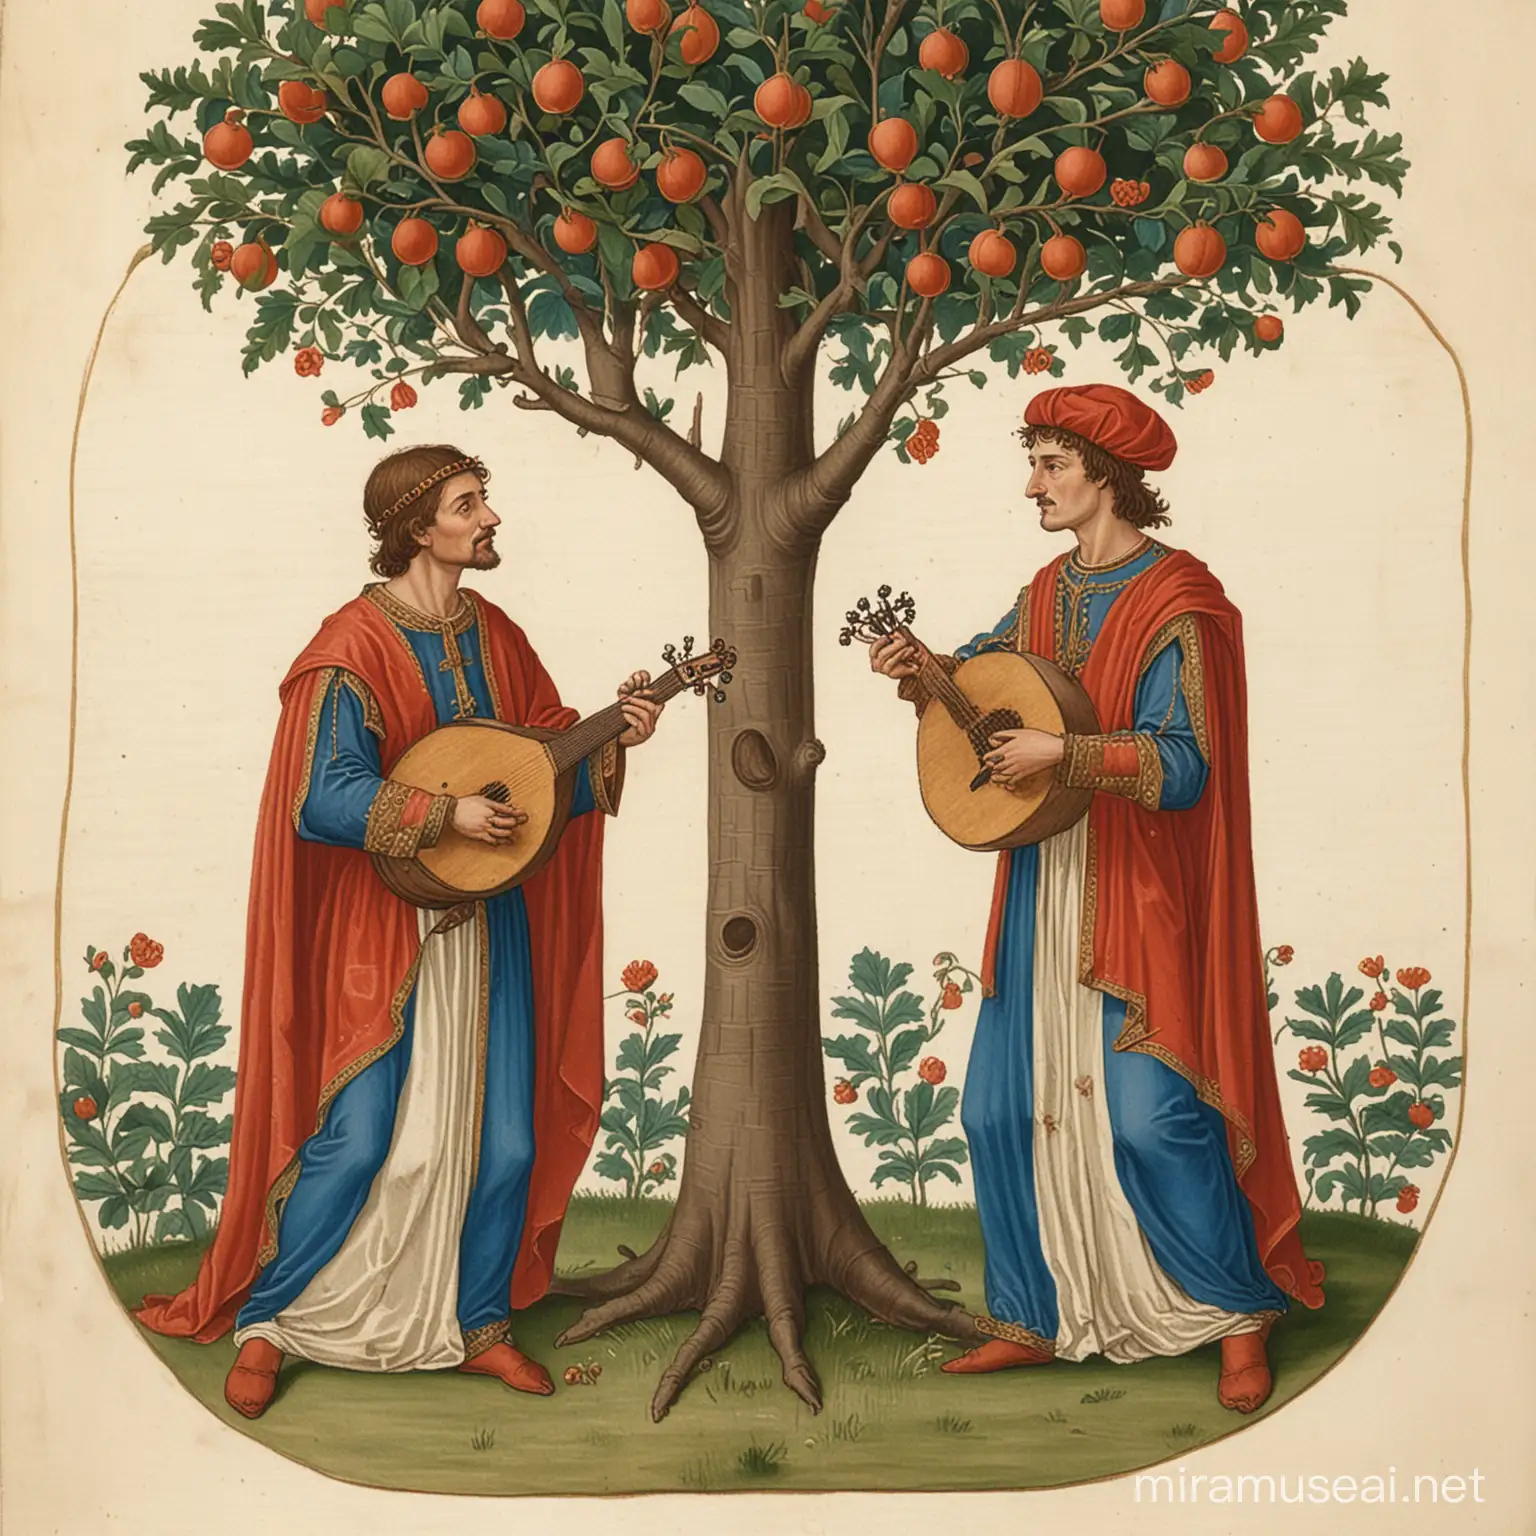 Medieval Musicians Performing by Fig Tree Codex Manesse Style Artwork